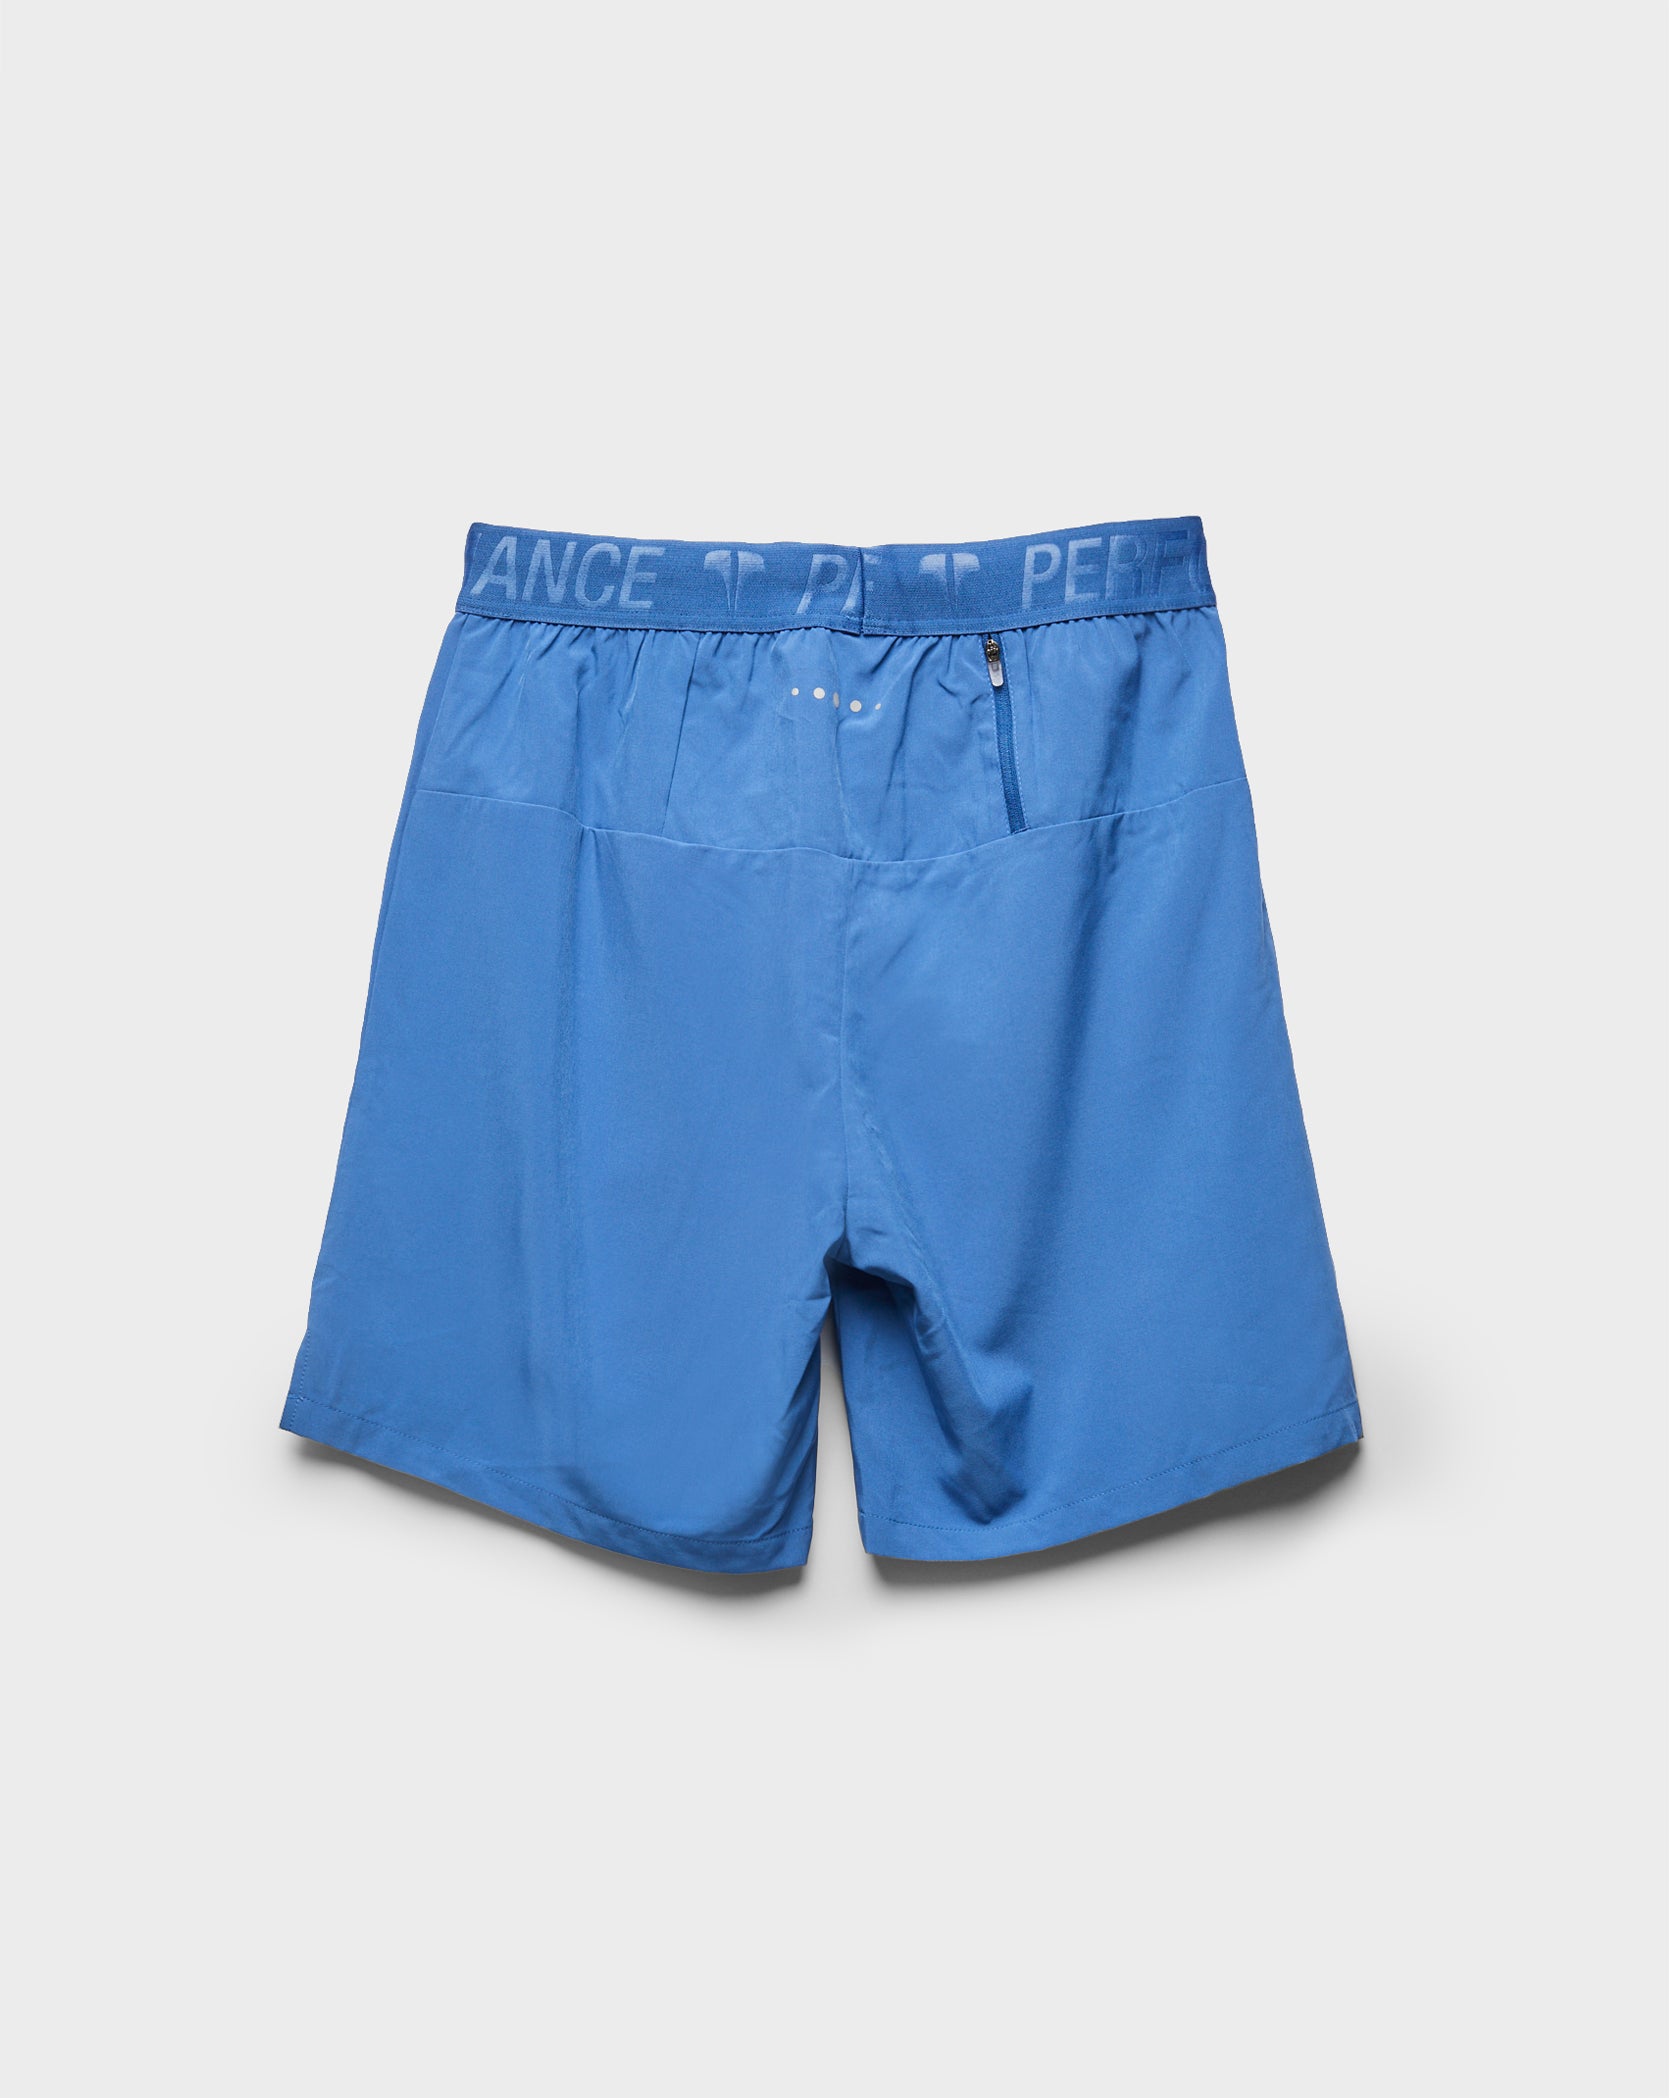 Twinzz active blue shorts back